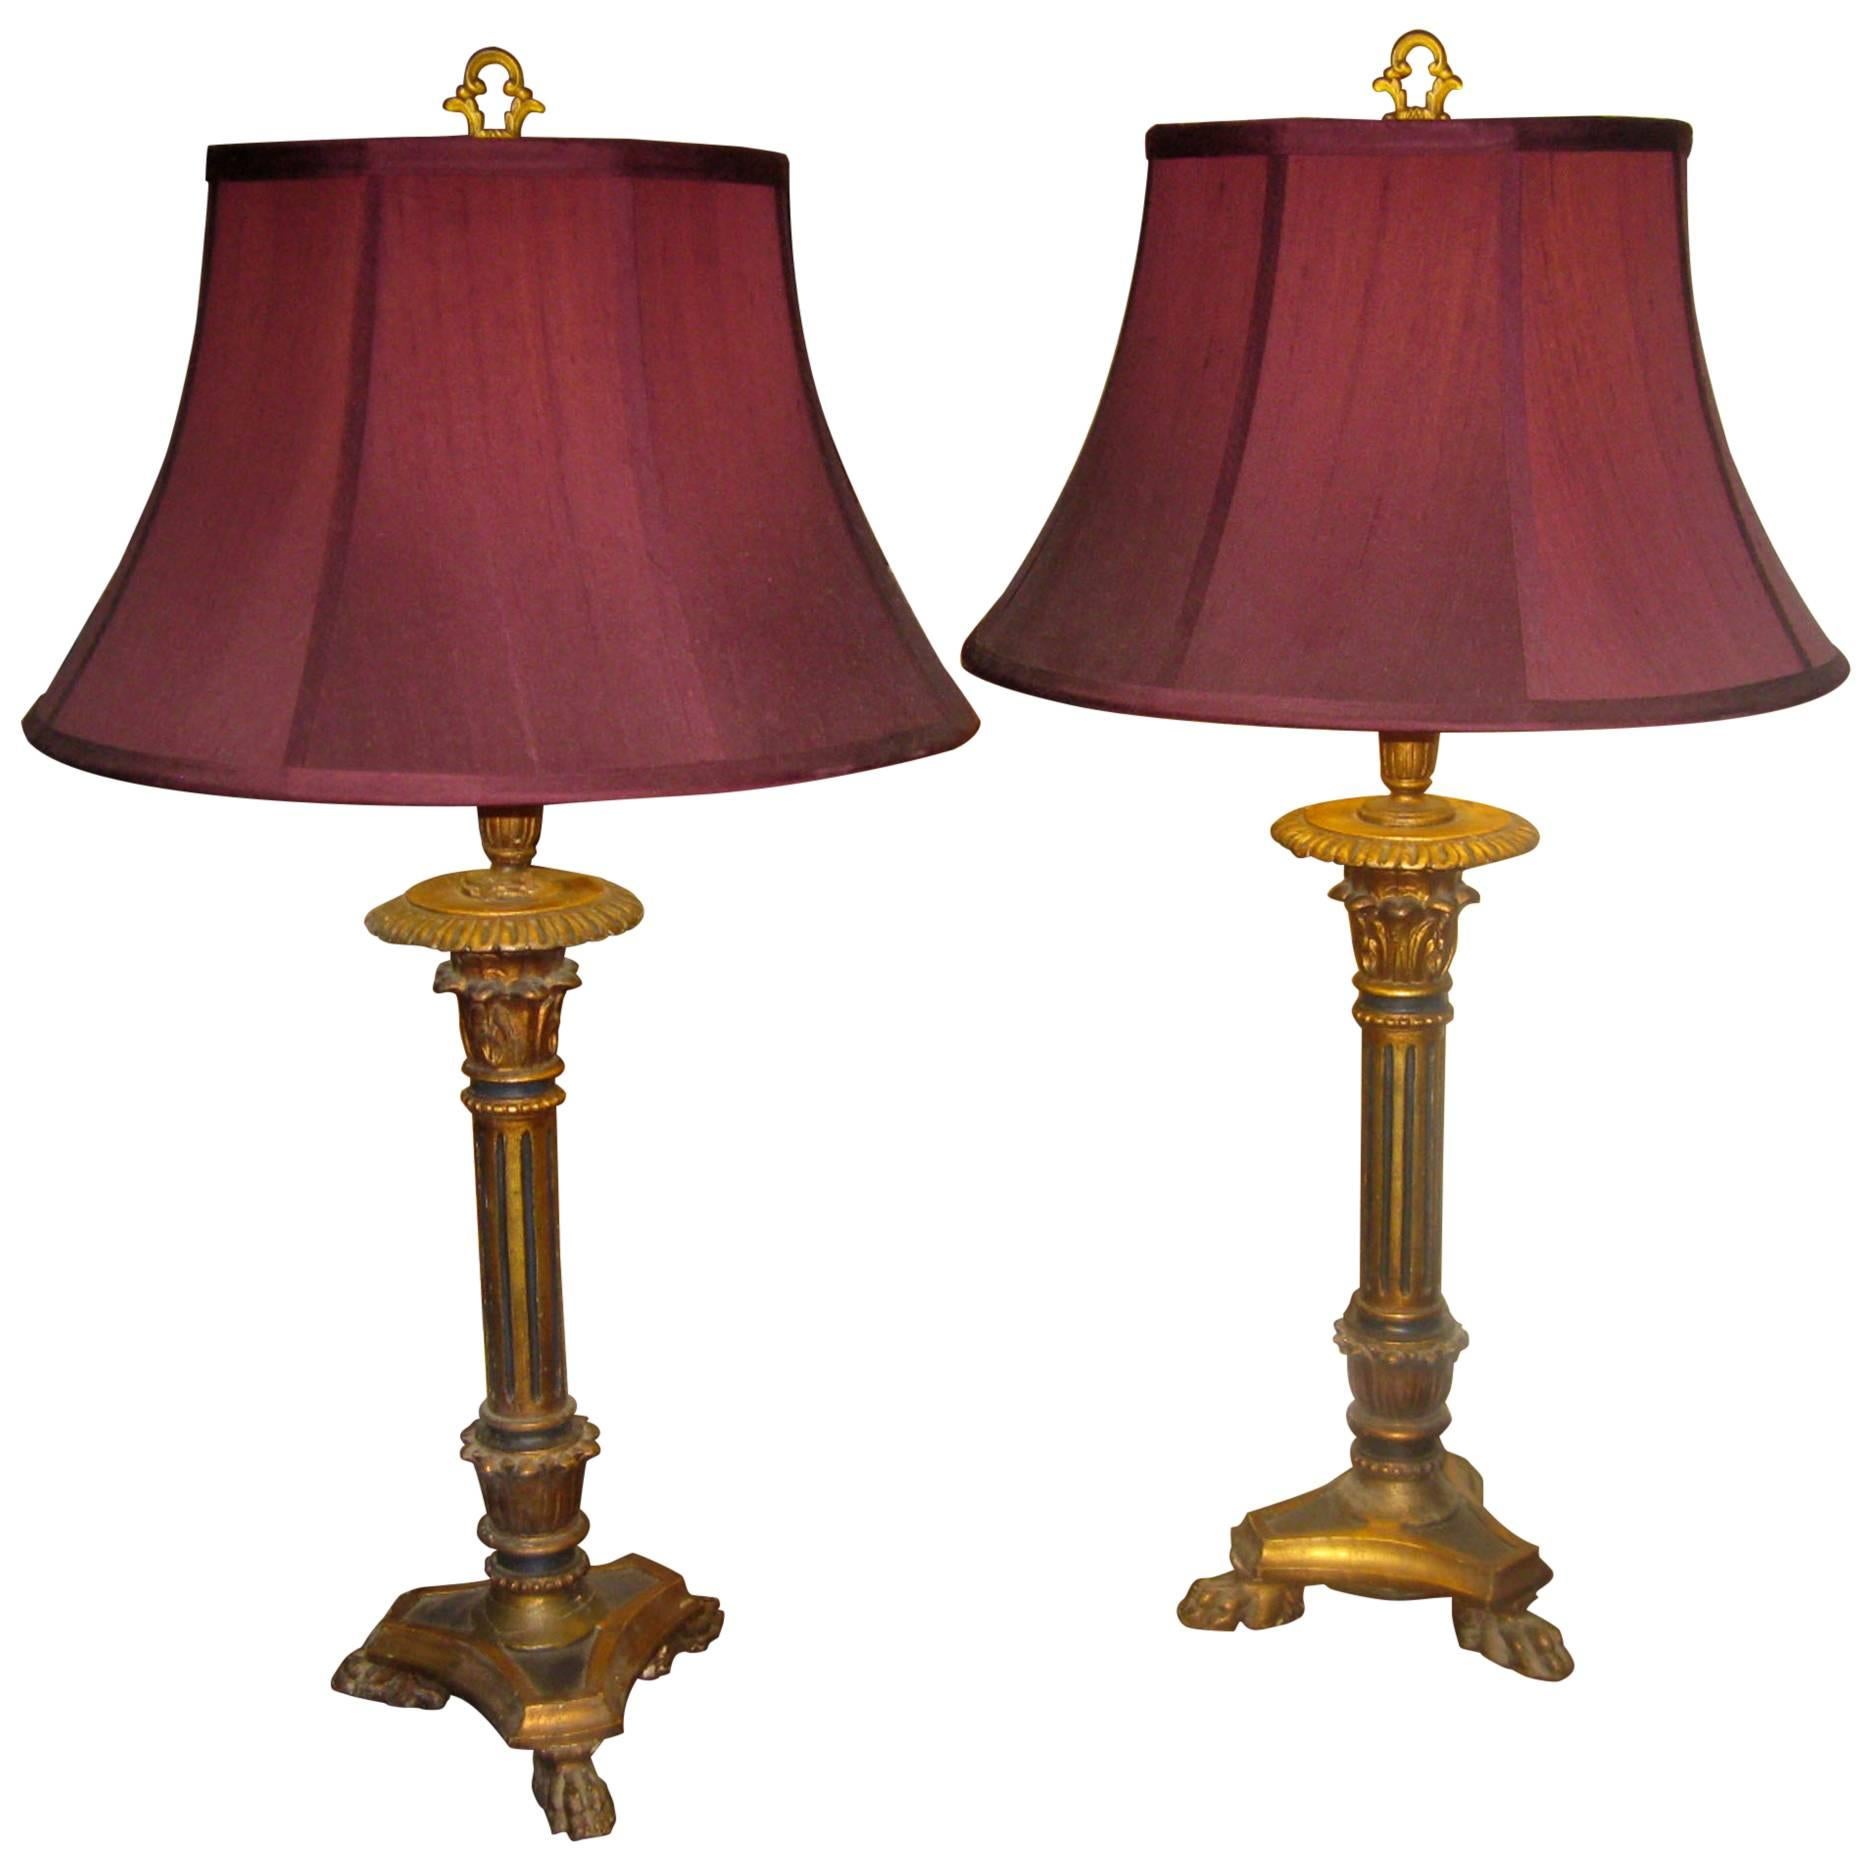 19th century Giltwood Converted Candlestick Lamp Pair For Sale